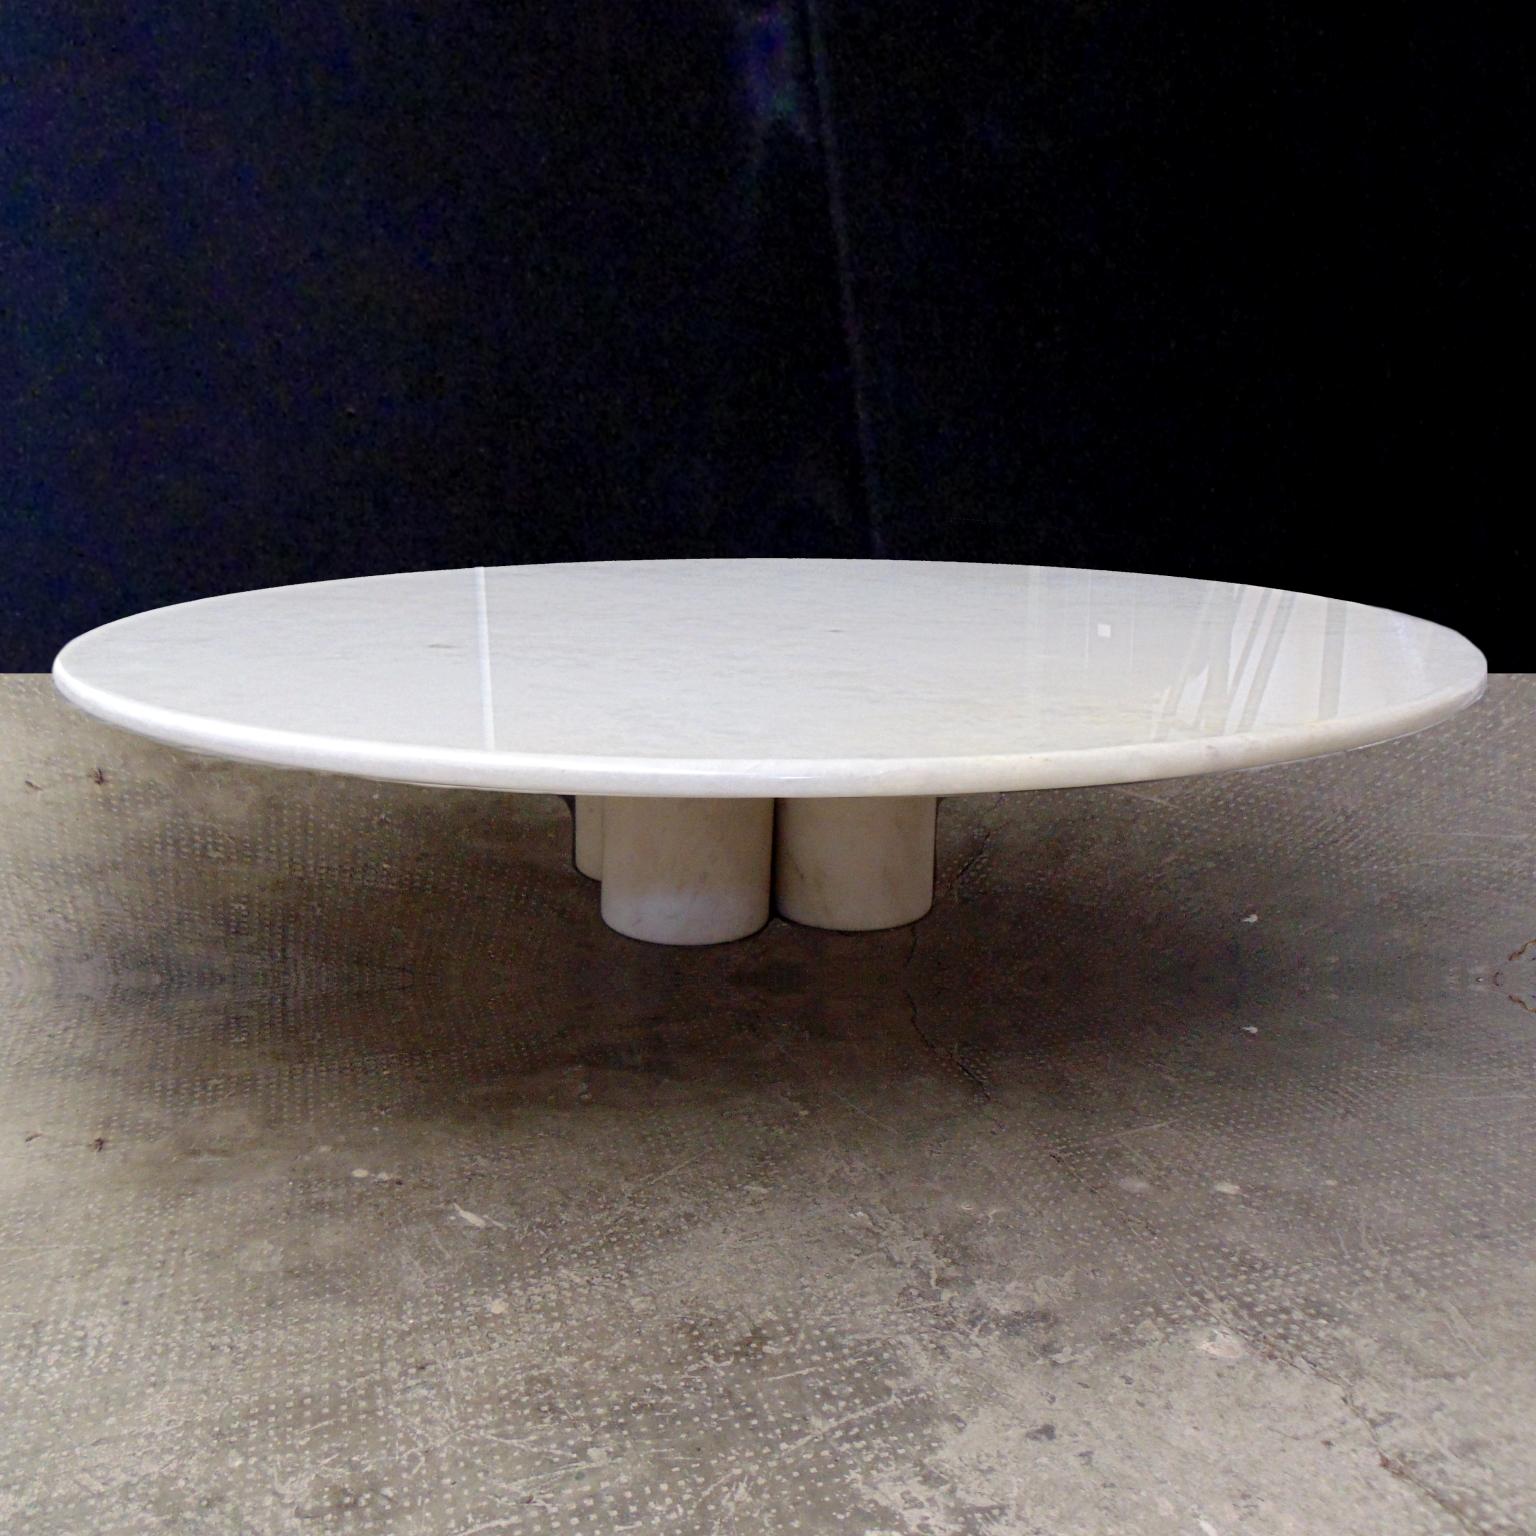 This white marble table (bianco neve of the Brescia area, Italy) has a round top, with rounded-up edge and four cylindrical legs with the upper part as a cone. The white marble is a quite precious type, of extreme clarity and with crystal